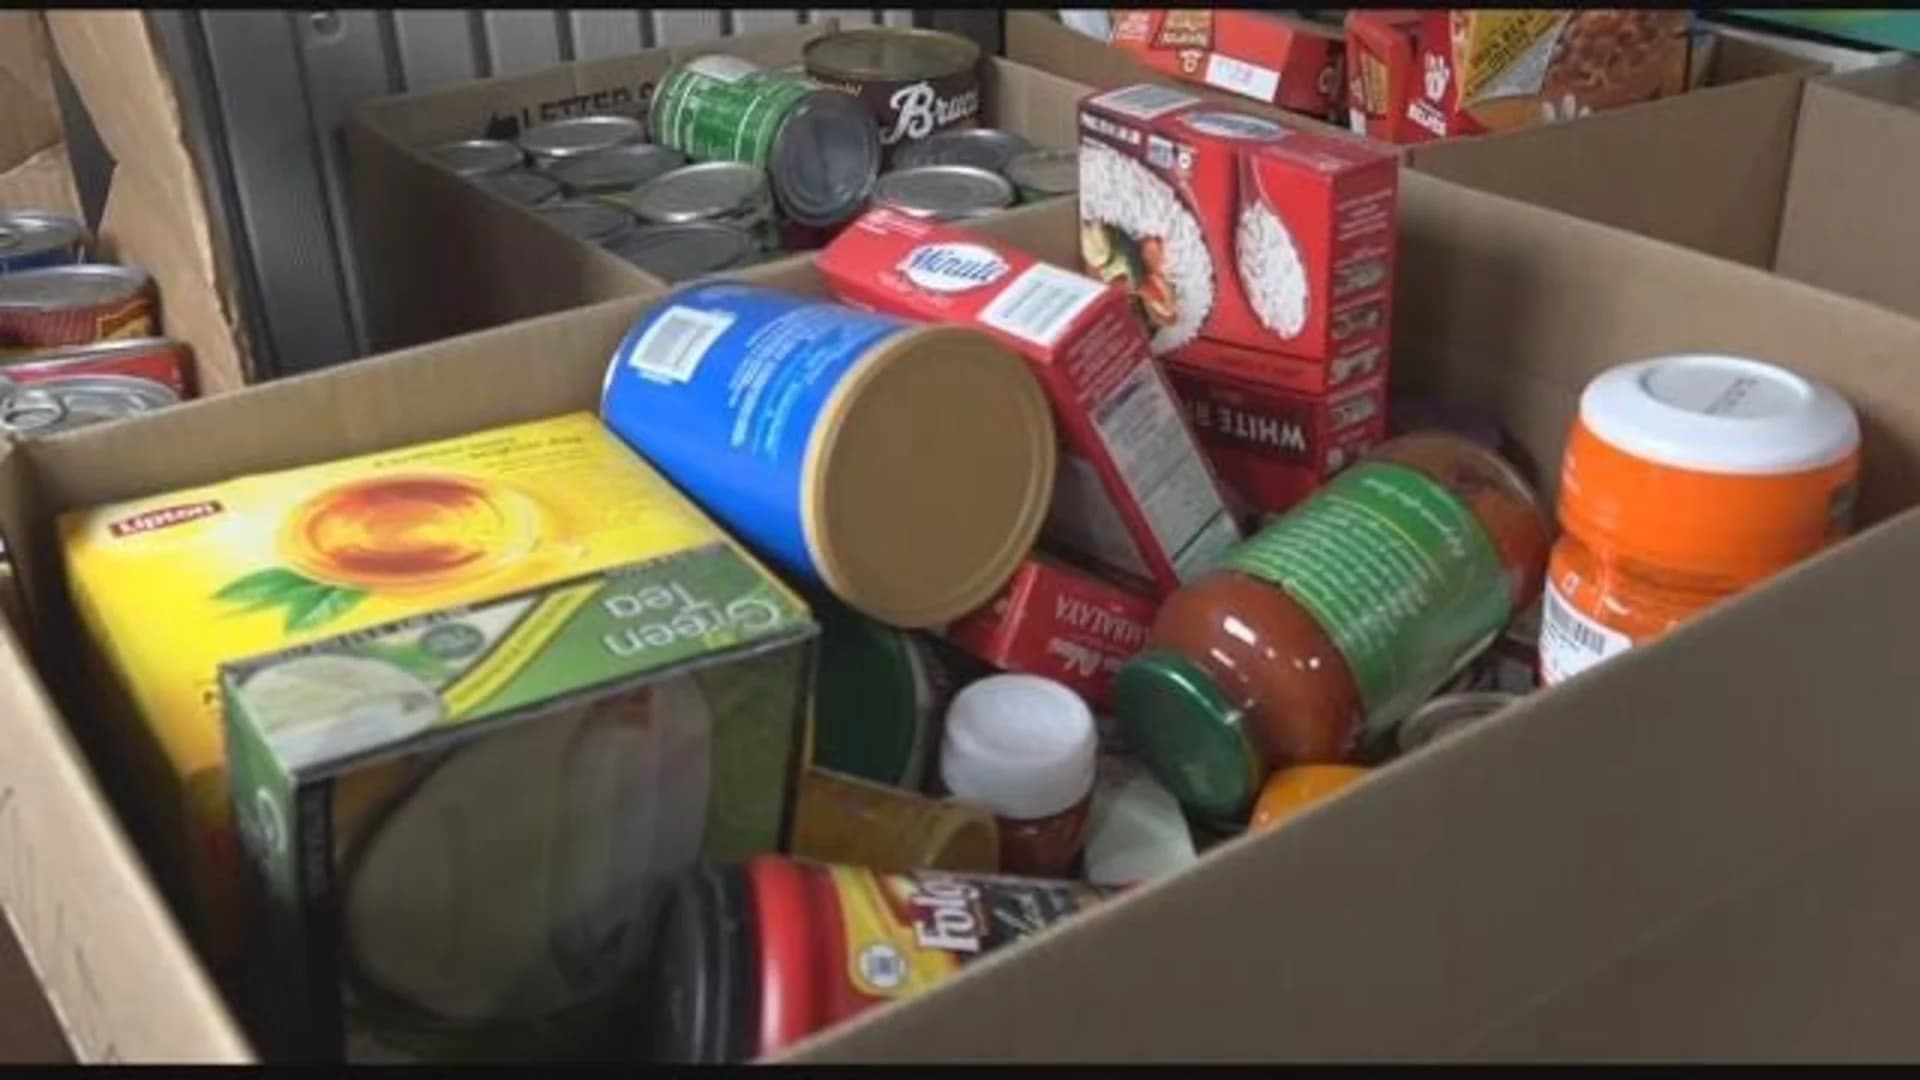 DonateNYC uses online portal to find excess food for those in need